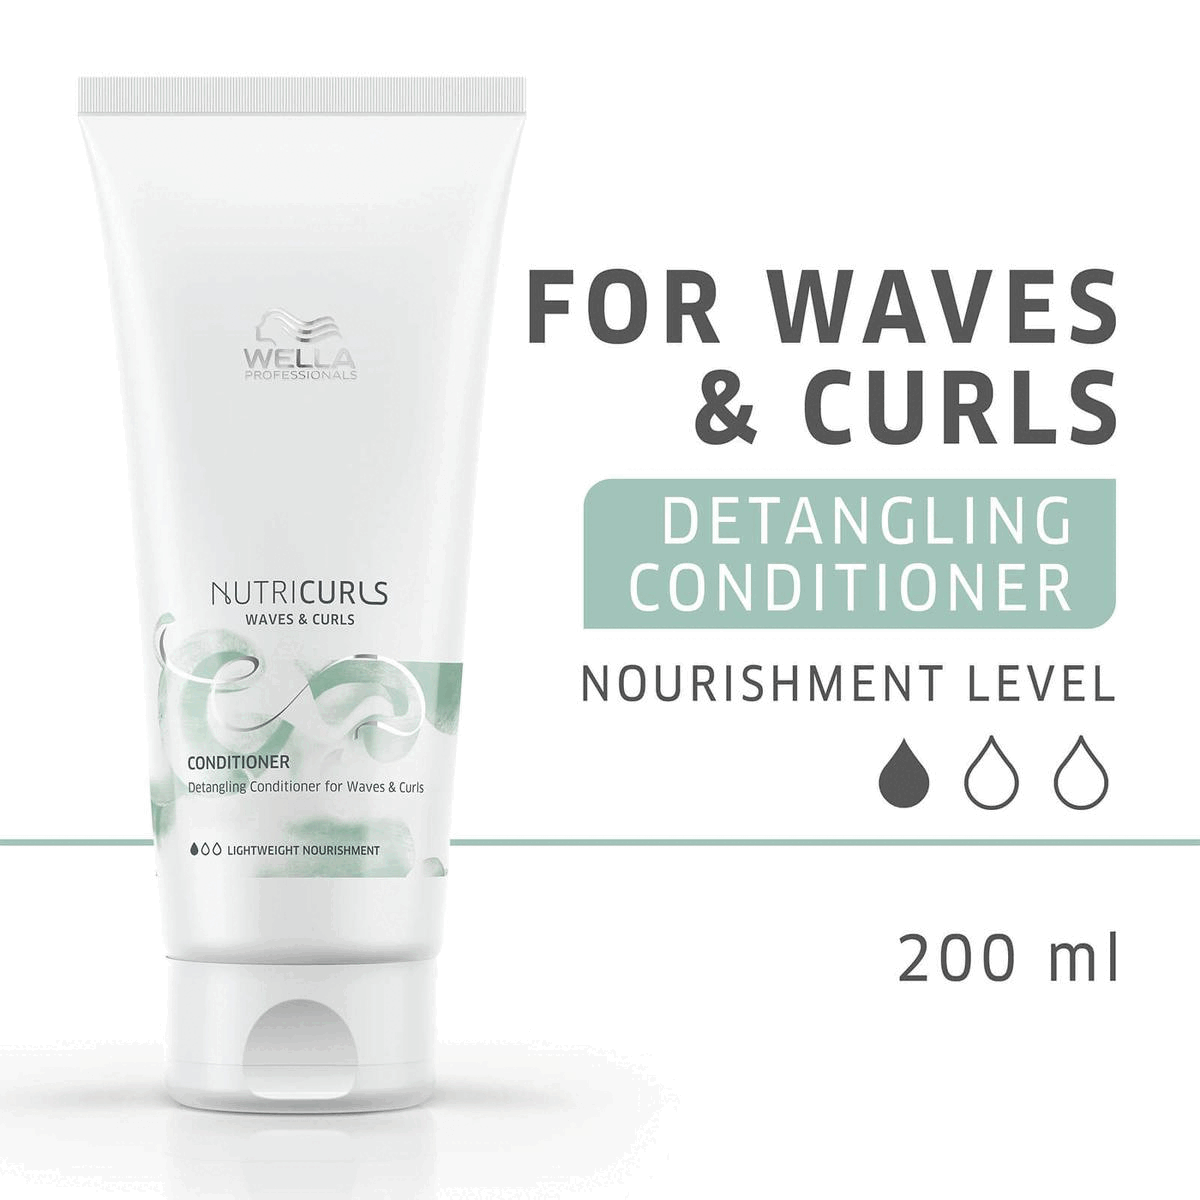 For waves & curves deep treatement , noruishment level - intense. For lightweight definition. Light Nourishment Level. Nourish-In Complex. Energizing Fragrance. Find the Perfect Partner. Nutricurls - Care & Styling Range*
            